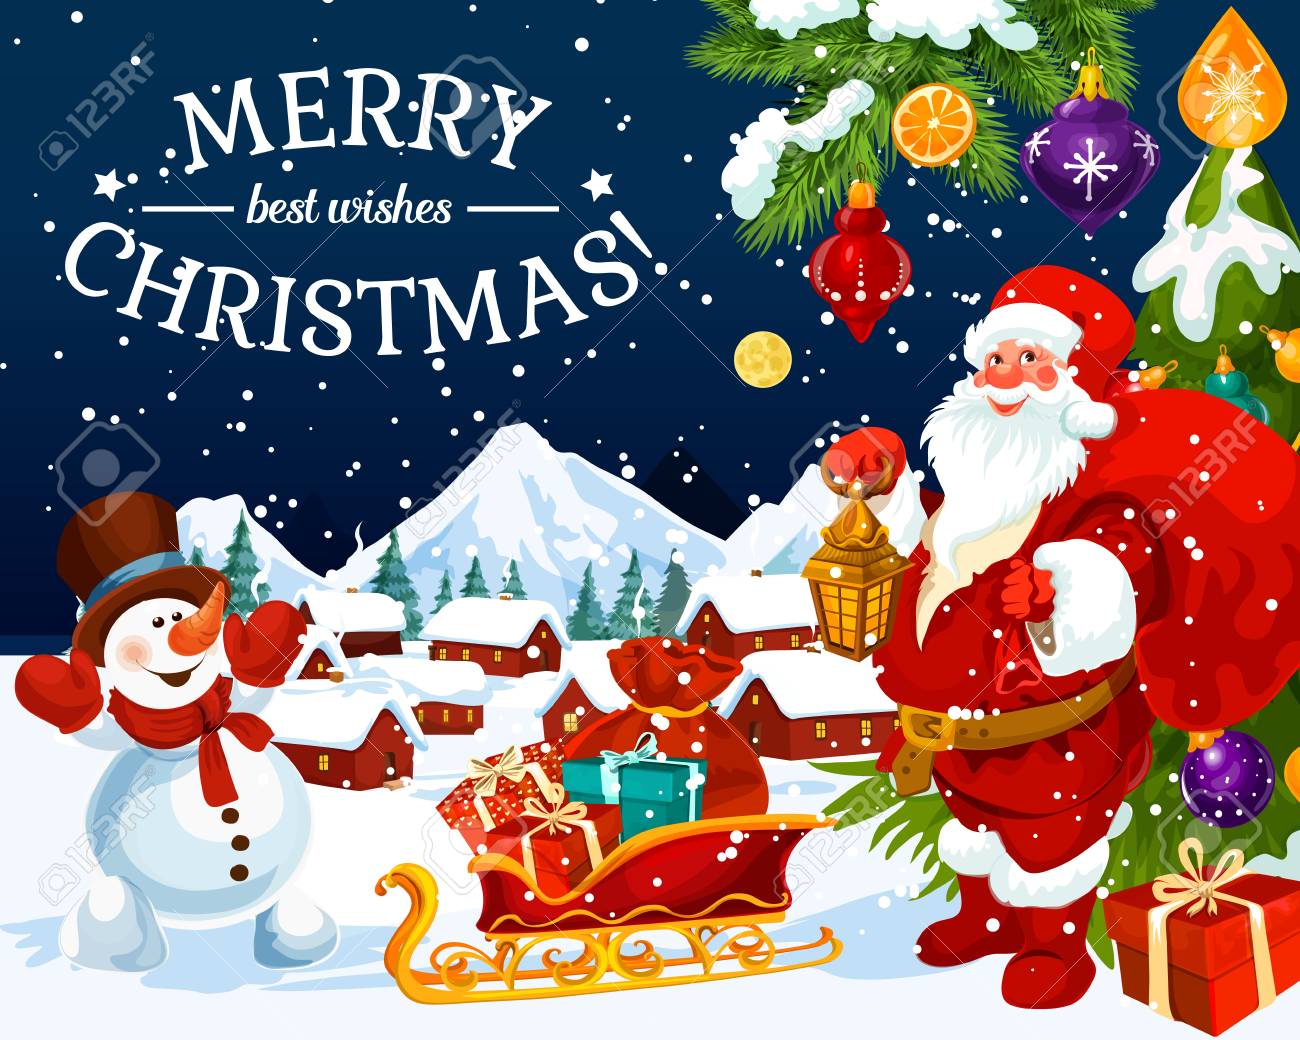 Merry Christmas Greeting Card And New Year Best Wishes Design... Royalty Free Cliparts, Vectors, And Stock Illustration. Image 109651077.